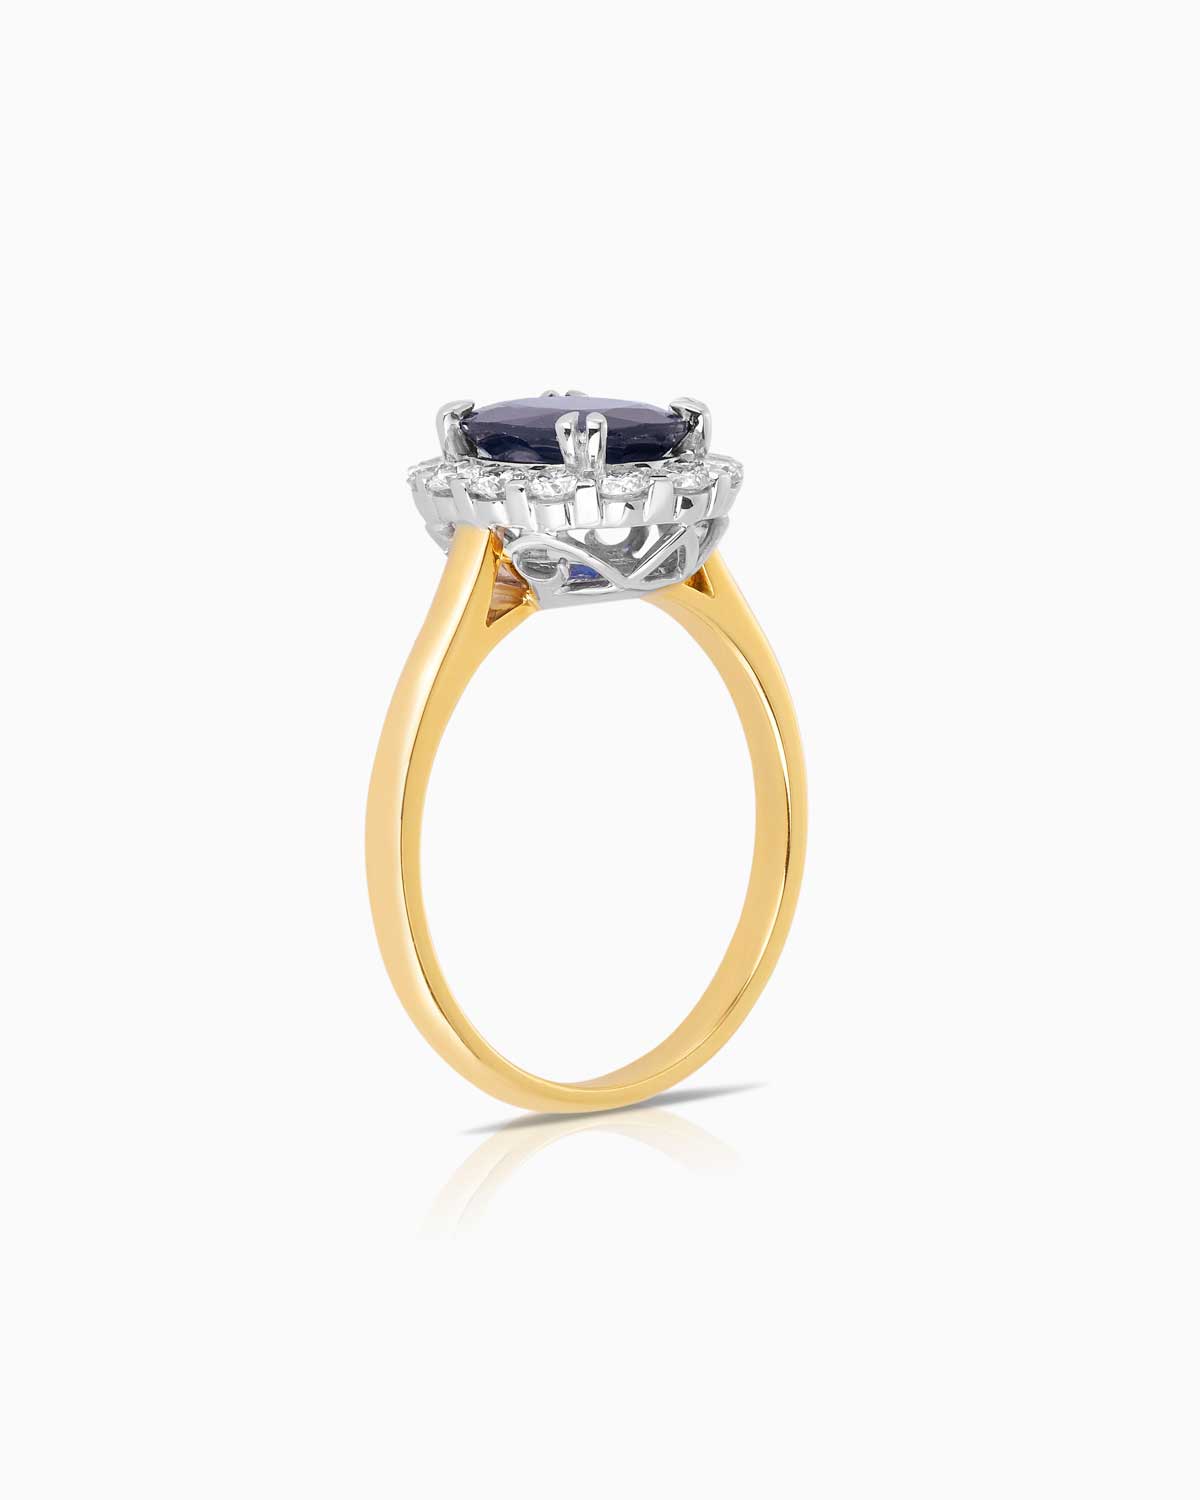 The 'Diana' 2.40ct Sapphire Ring features 18k yellow/white gold, a single halo of white diamonds and a white gold decorative underail.